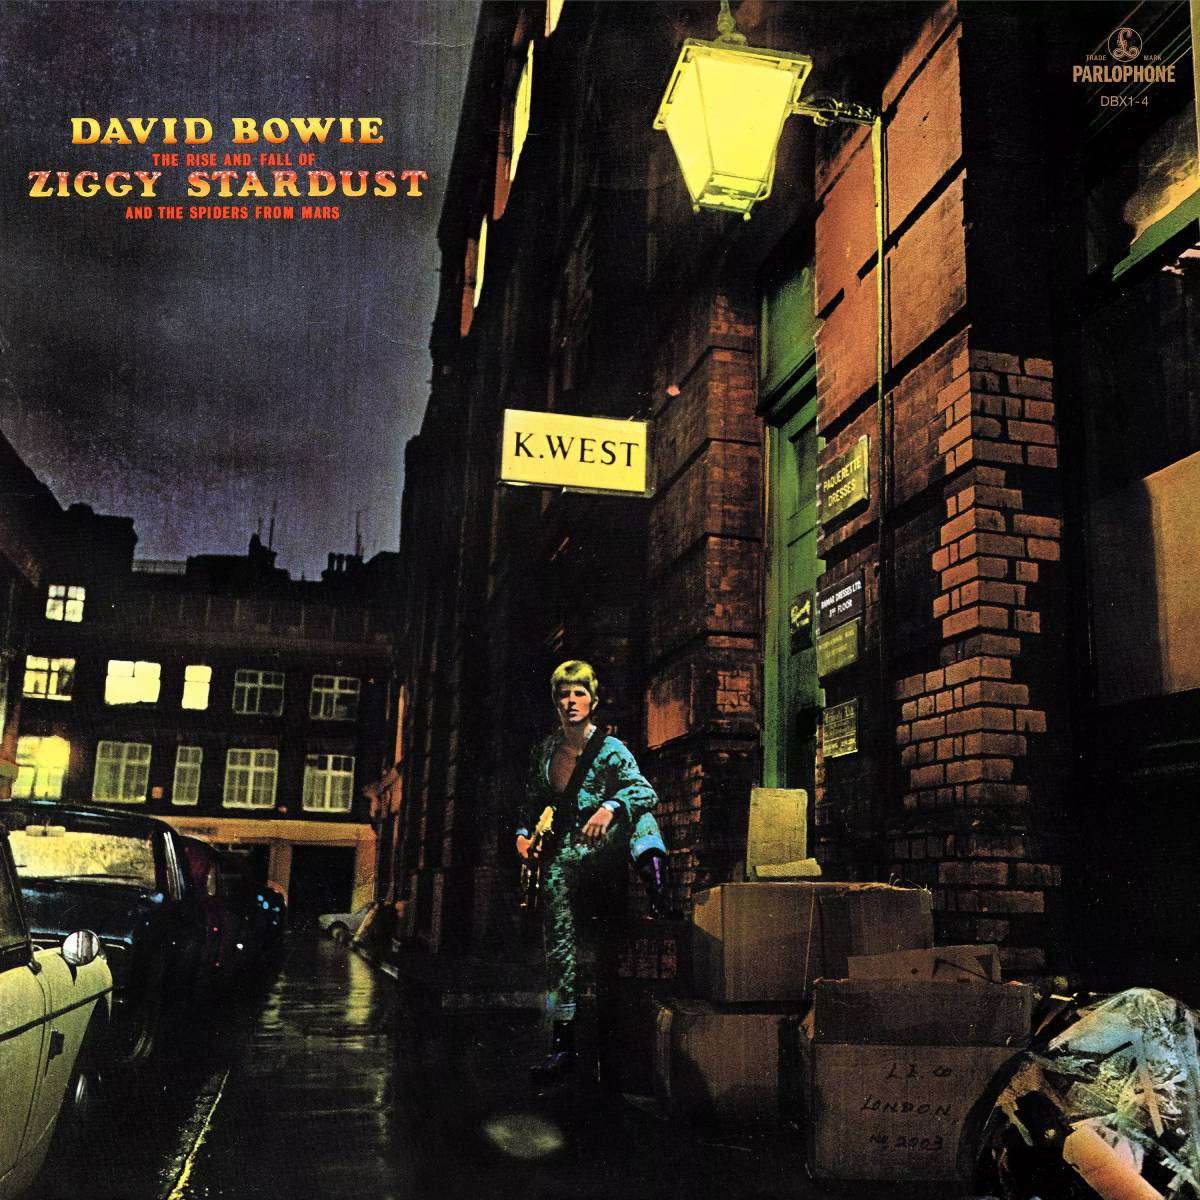 Portada del álbum de David Bowie The Rise And Fall Of Ziggy Stardust And The Spiders From Mars